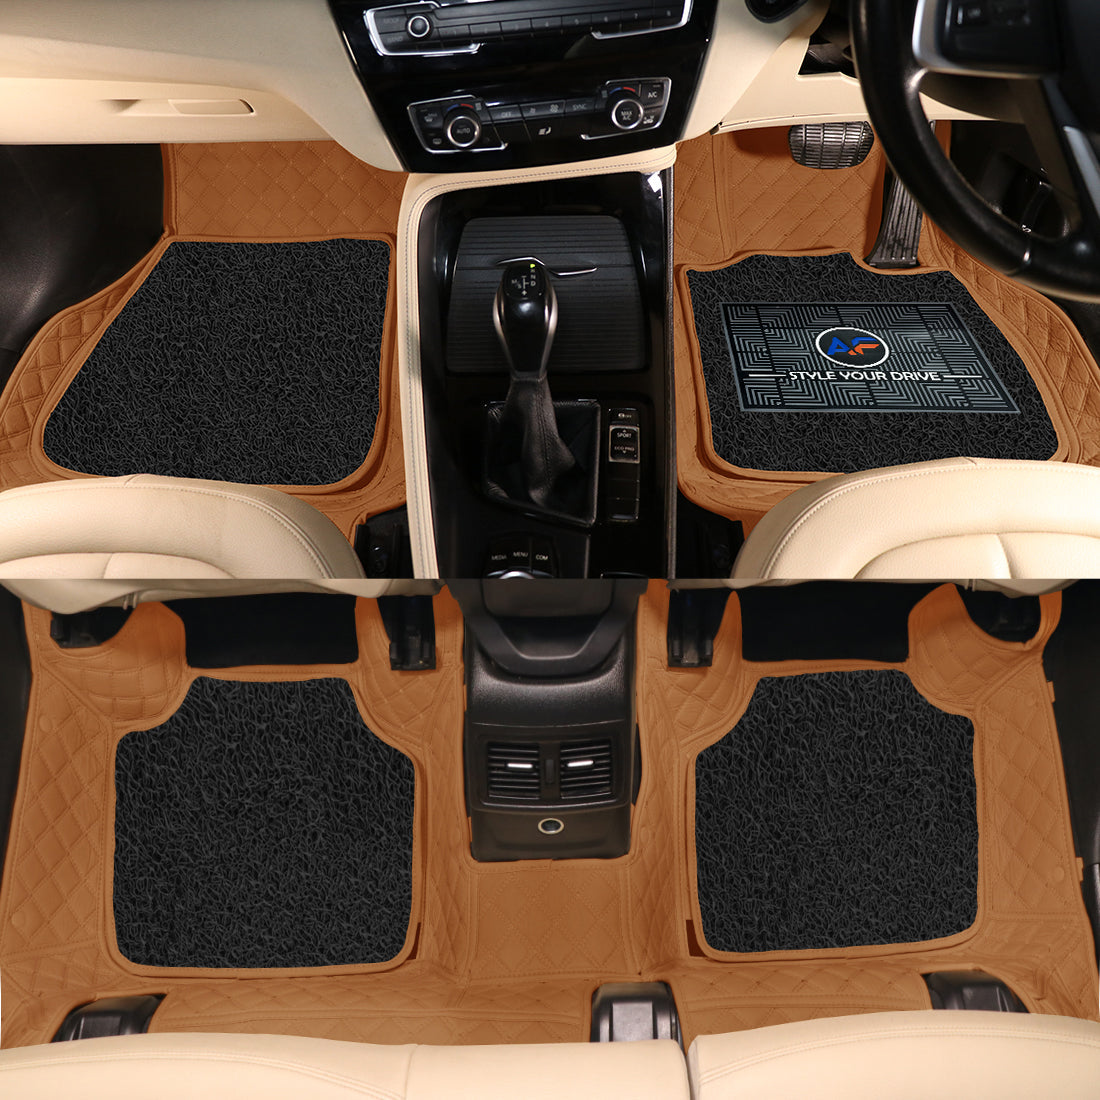 Mercedes GLA 200 2021 7D Luxury Car Mat, All Weather Proof, Anti-Skid, 100% Waterproof & Odorless with Unique Diamond Fish Design (24mm Luxury PU Leather, 2 Rows)